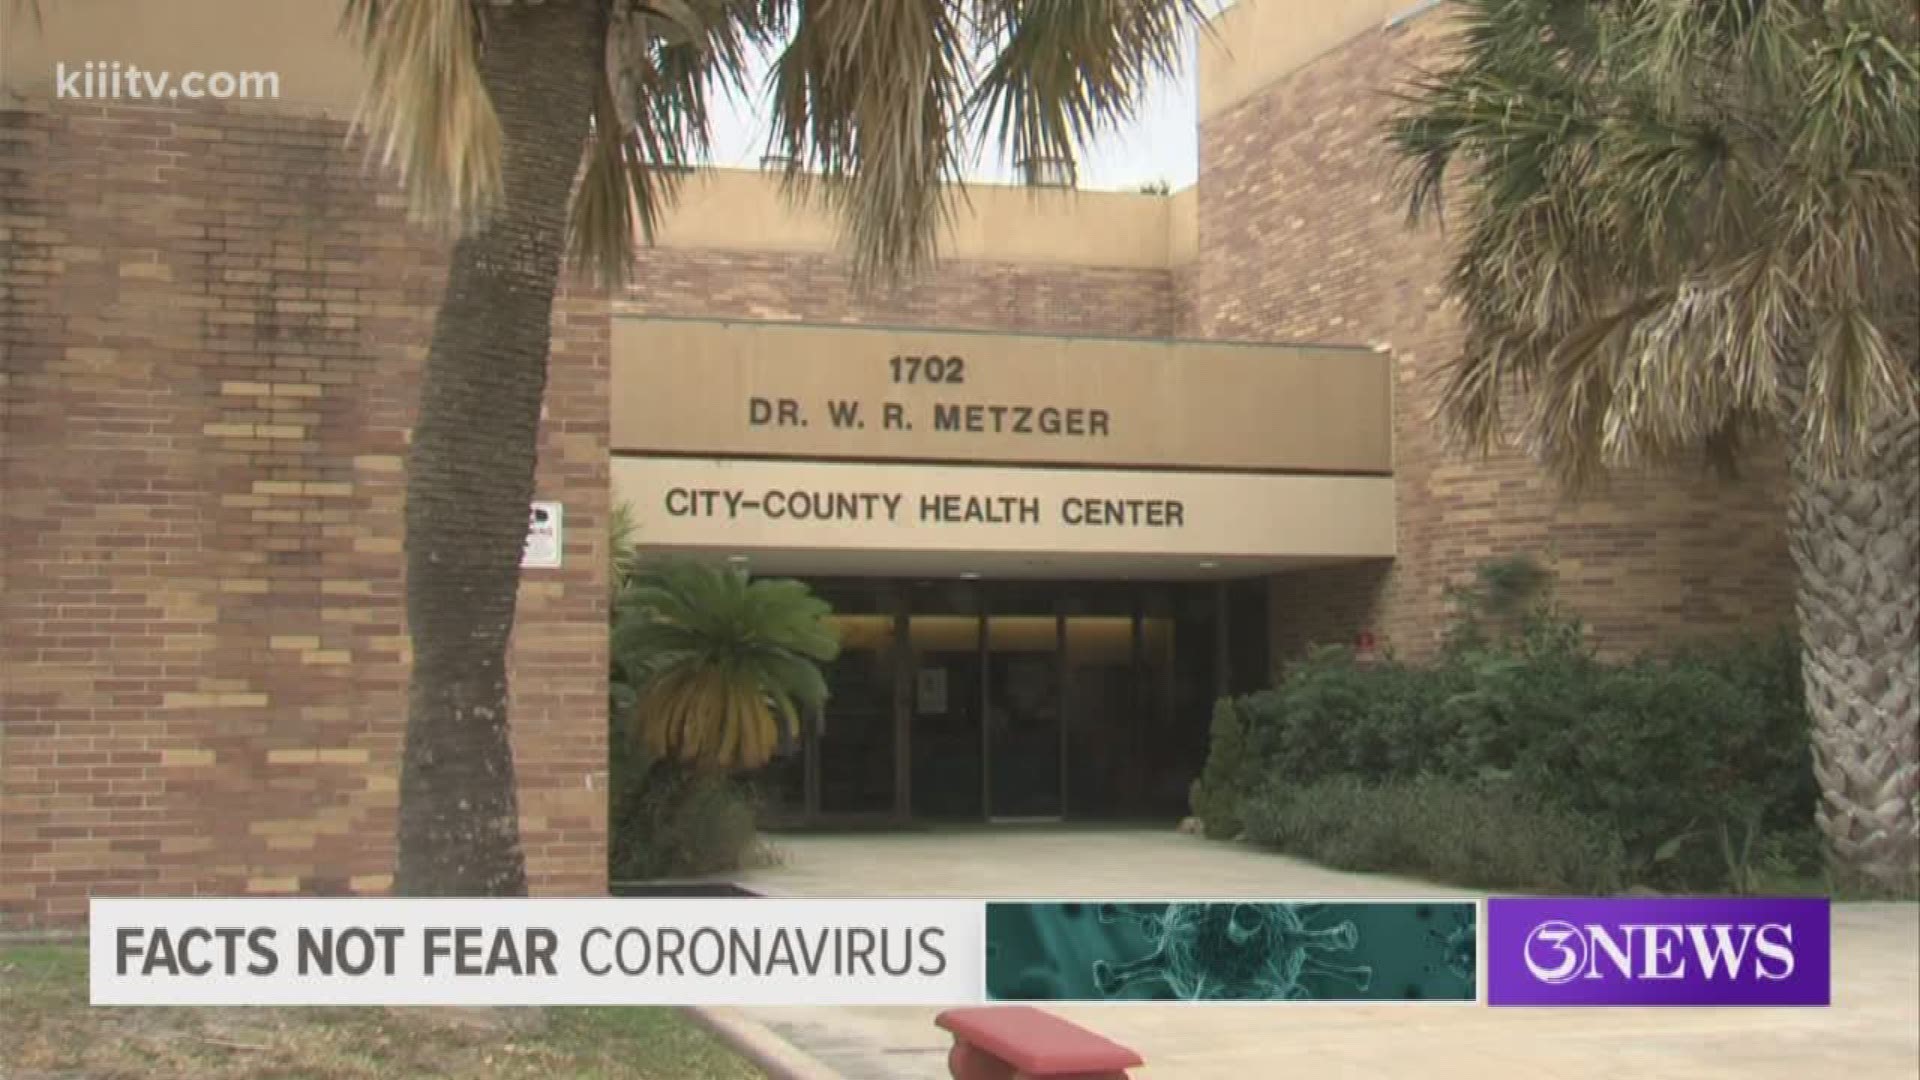 Two people in Corpus Christi remain under self-imposed quarantine in their homes having arrived recently from China, according to the City-County Health Department.